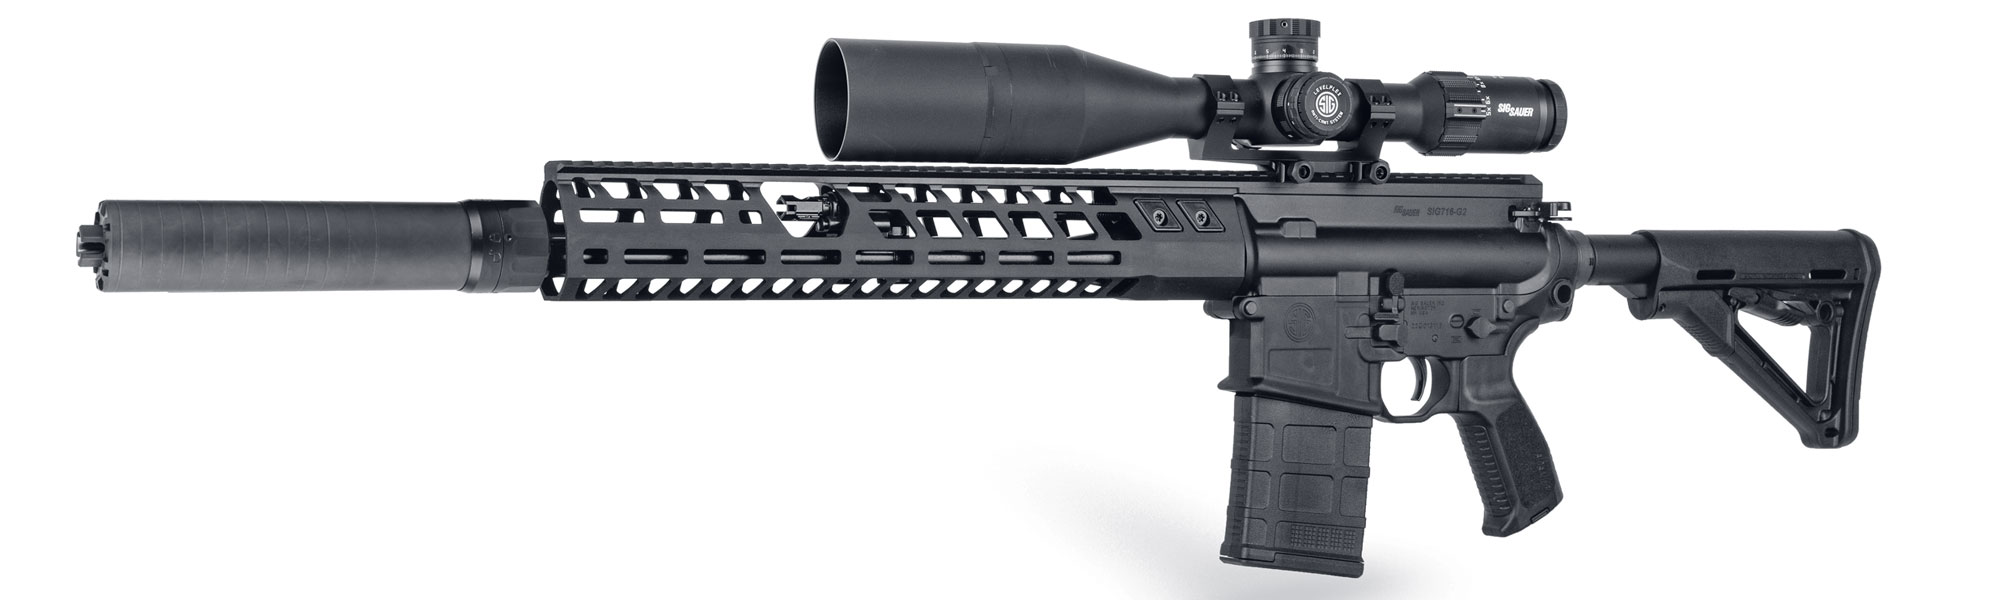 Featured product #8 is the 716DMR scoped for long range engagements. 